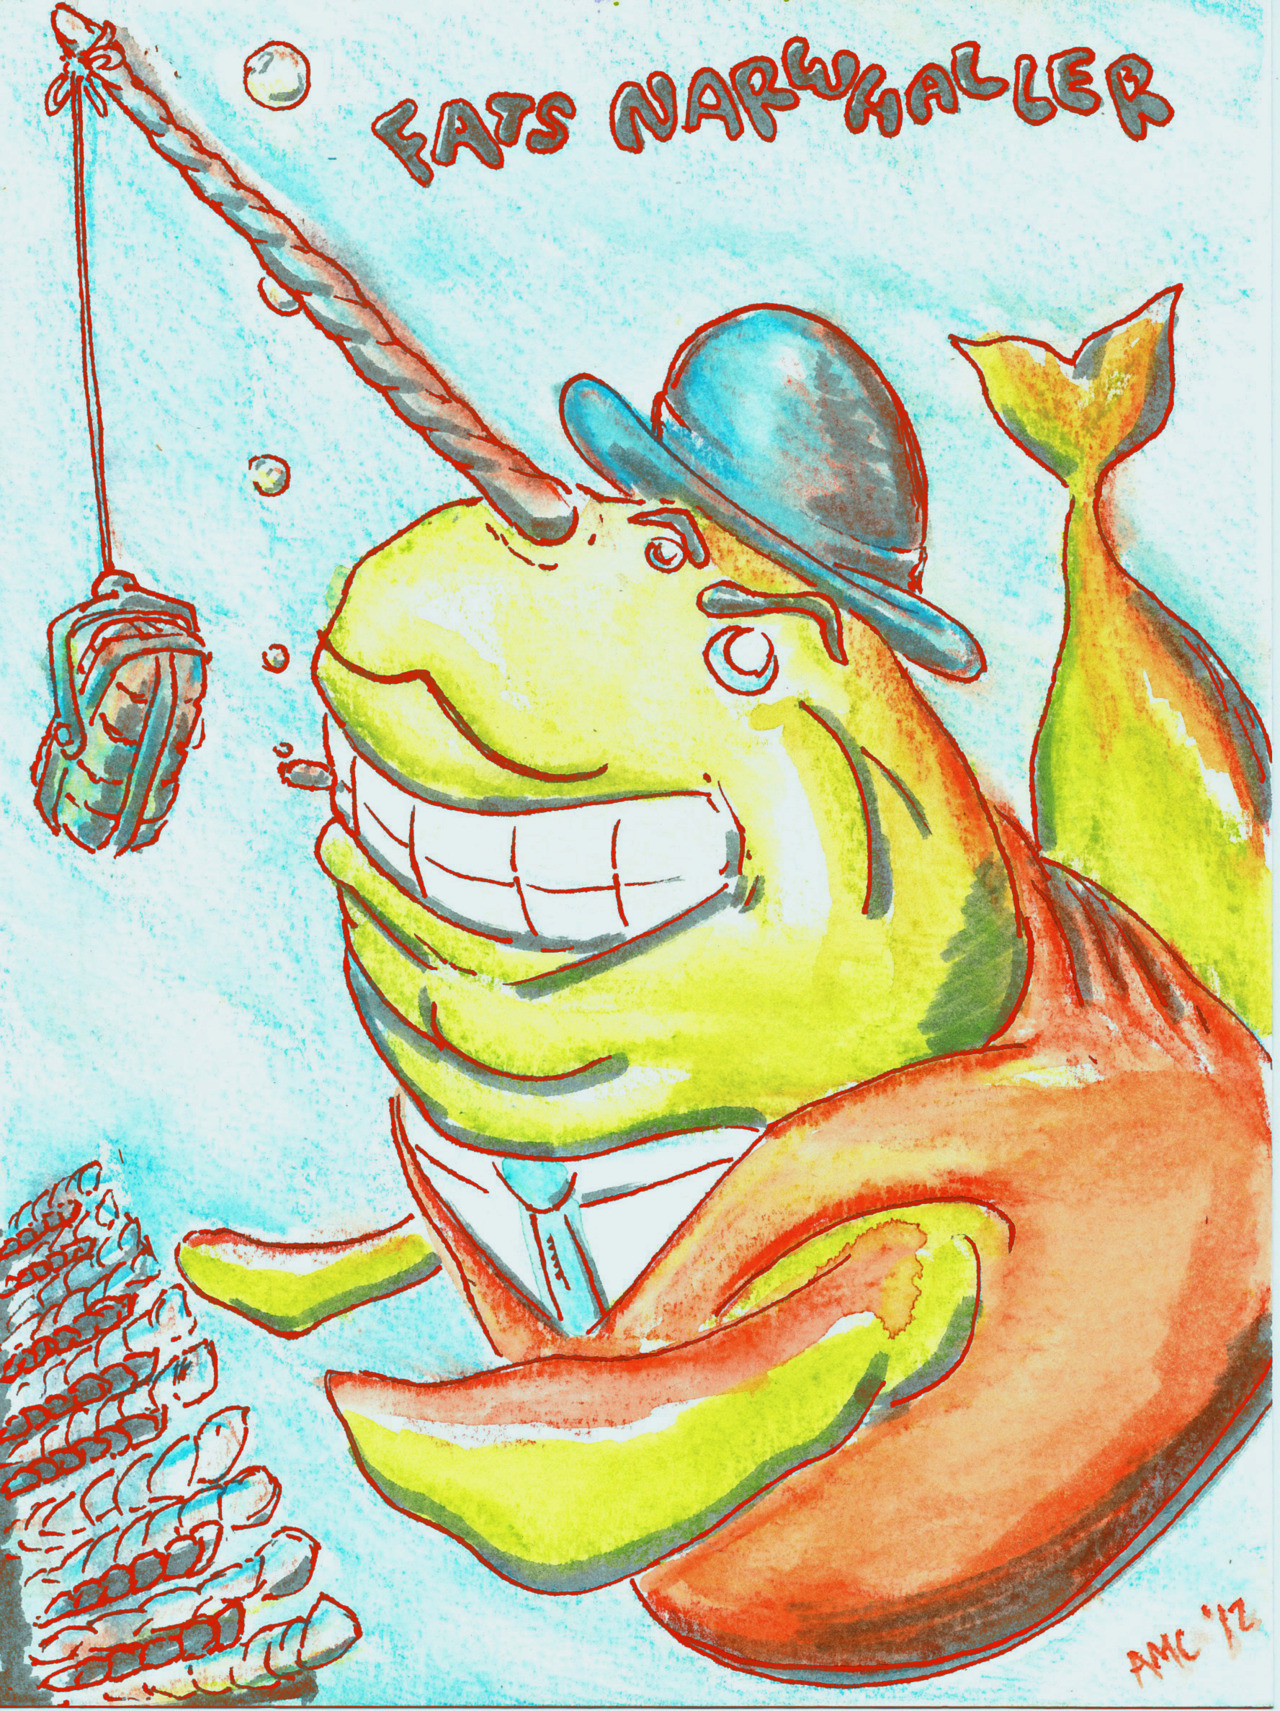 Fats Waller as a Narwhal